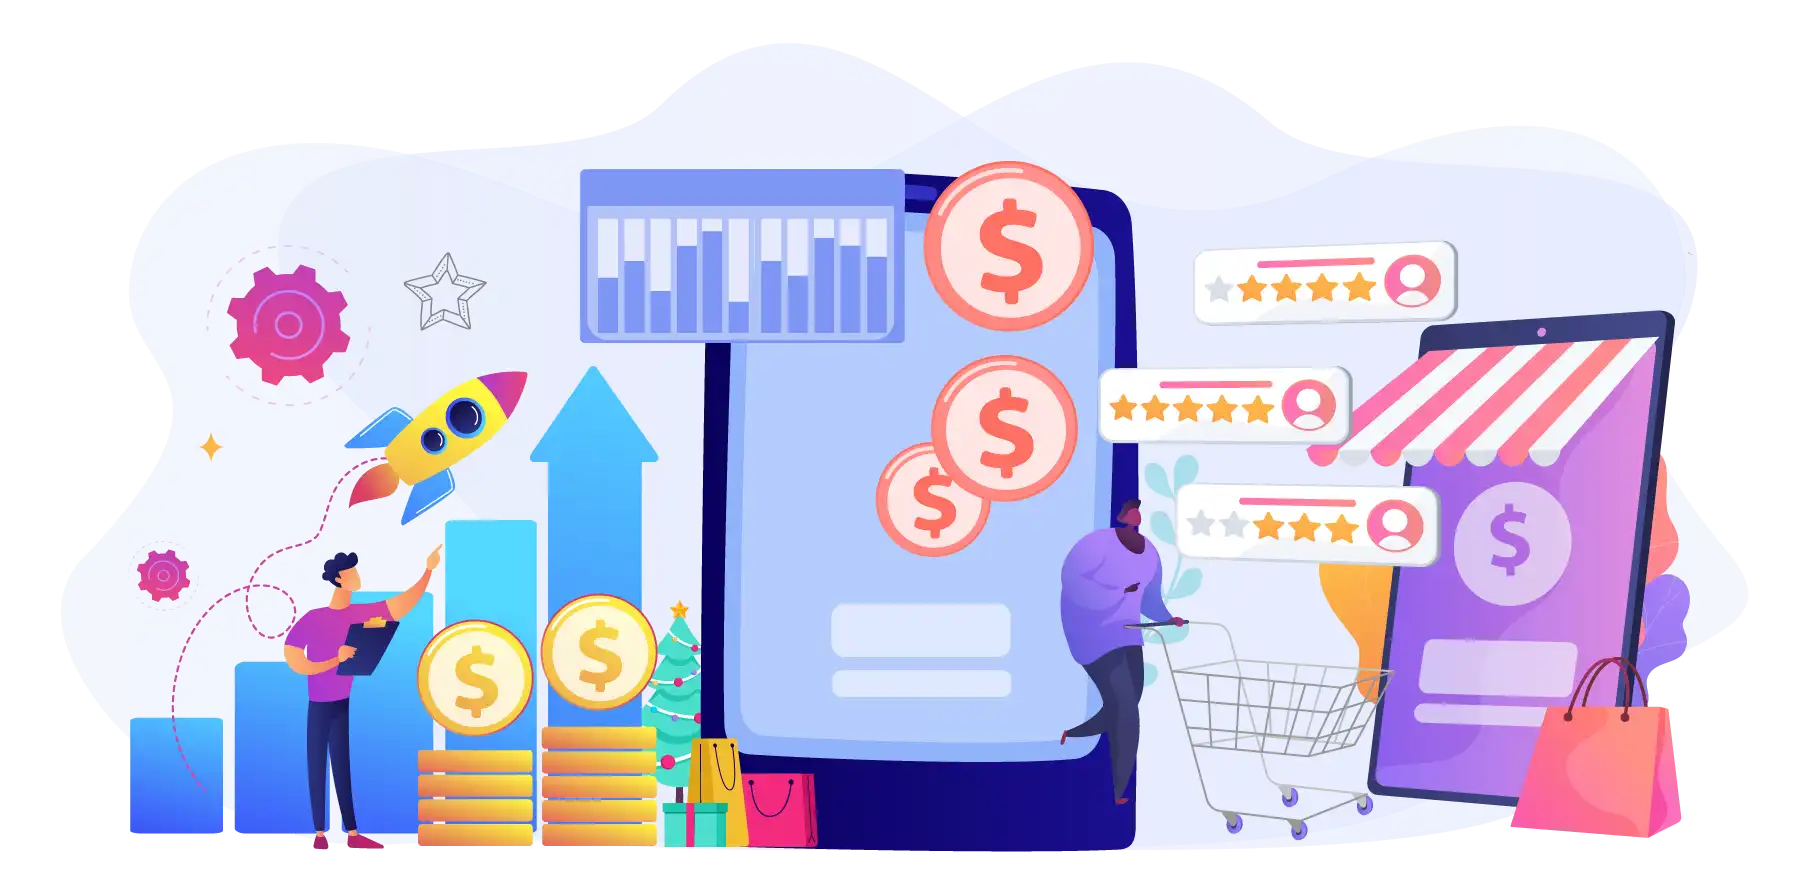 14 TIPS AND TRICKS TO INCREASE ECOMMERCE SALES DURING THE HOLIDAY SEASON 2021